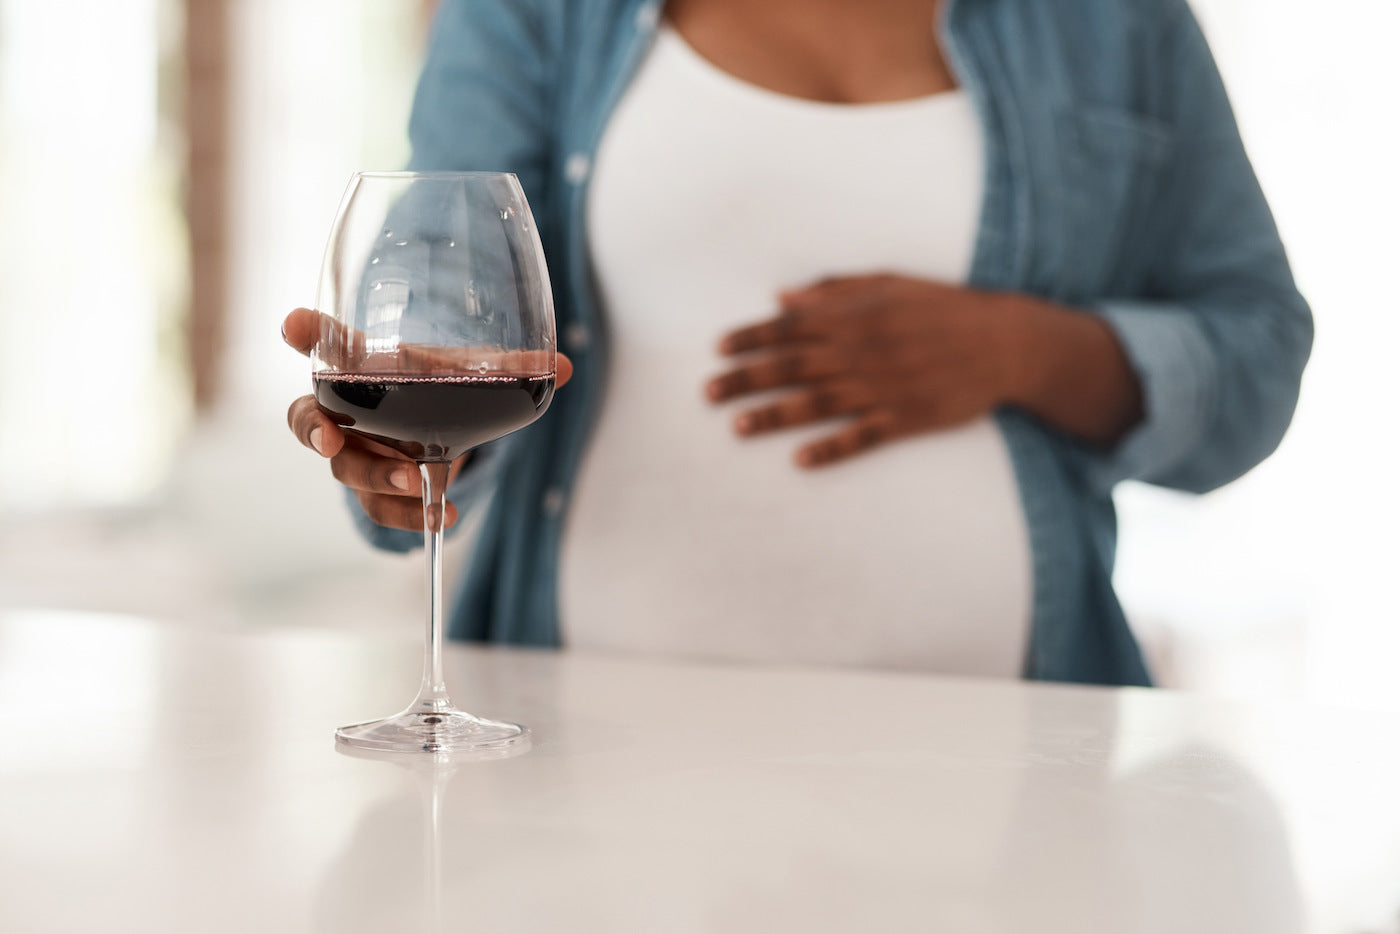 drinking and pregnancy